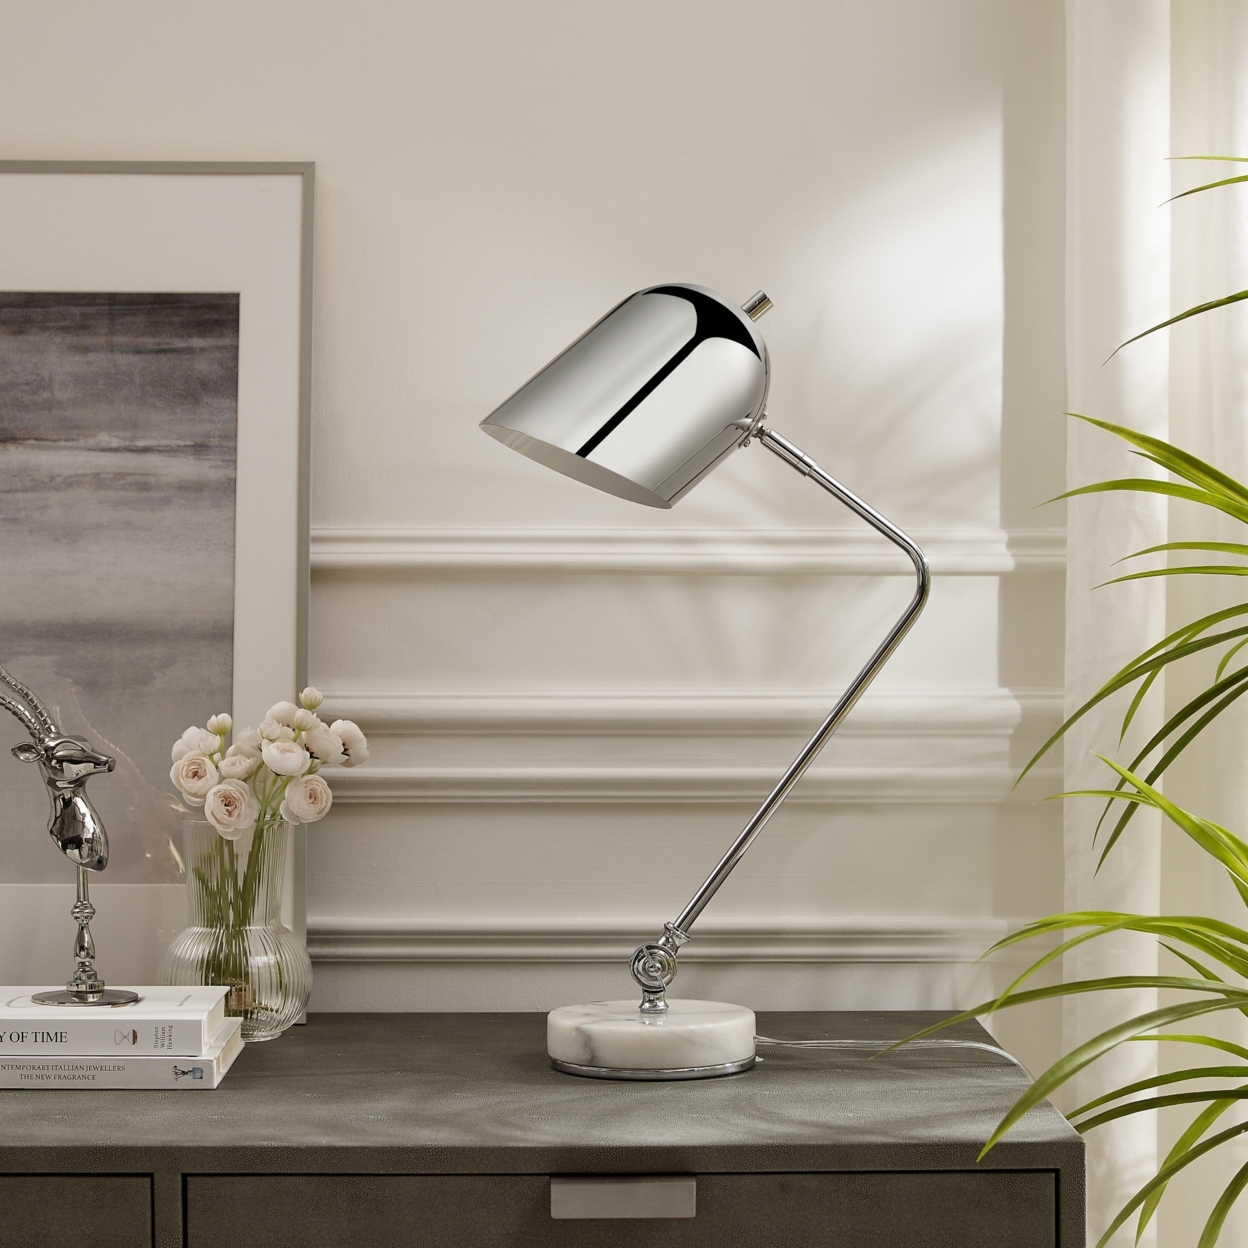 Vania Table Lamp - 5ft Power Cord, Marble Stone Base , Sturdy Metal Frame With Adjustable Angles , Rotary Switch - Chrome